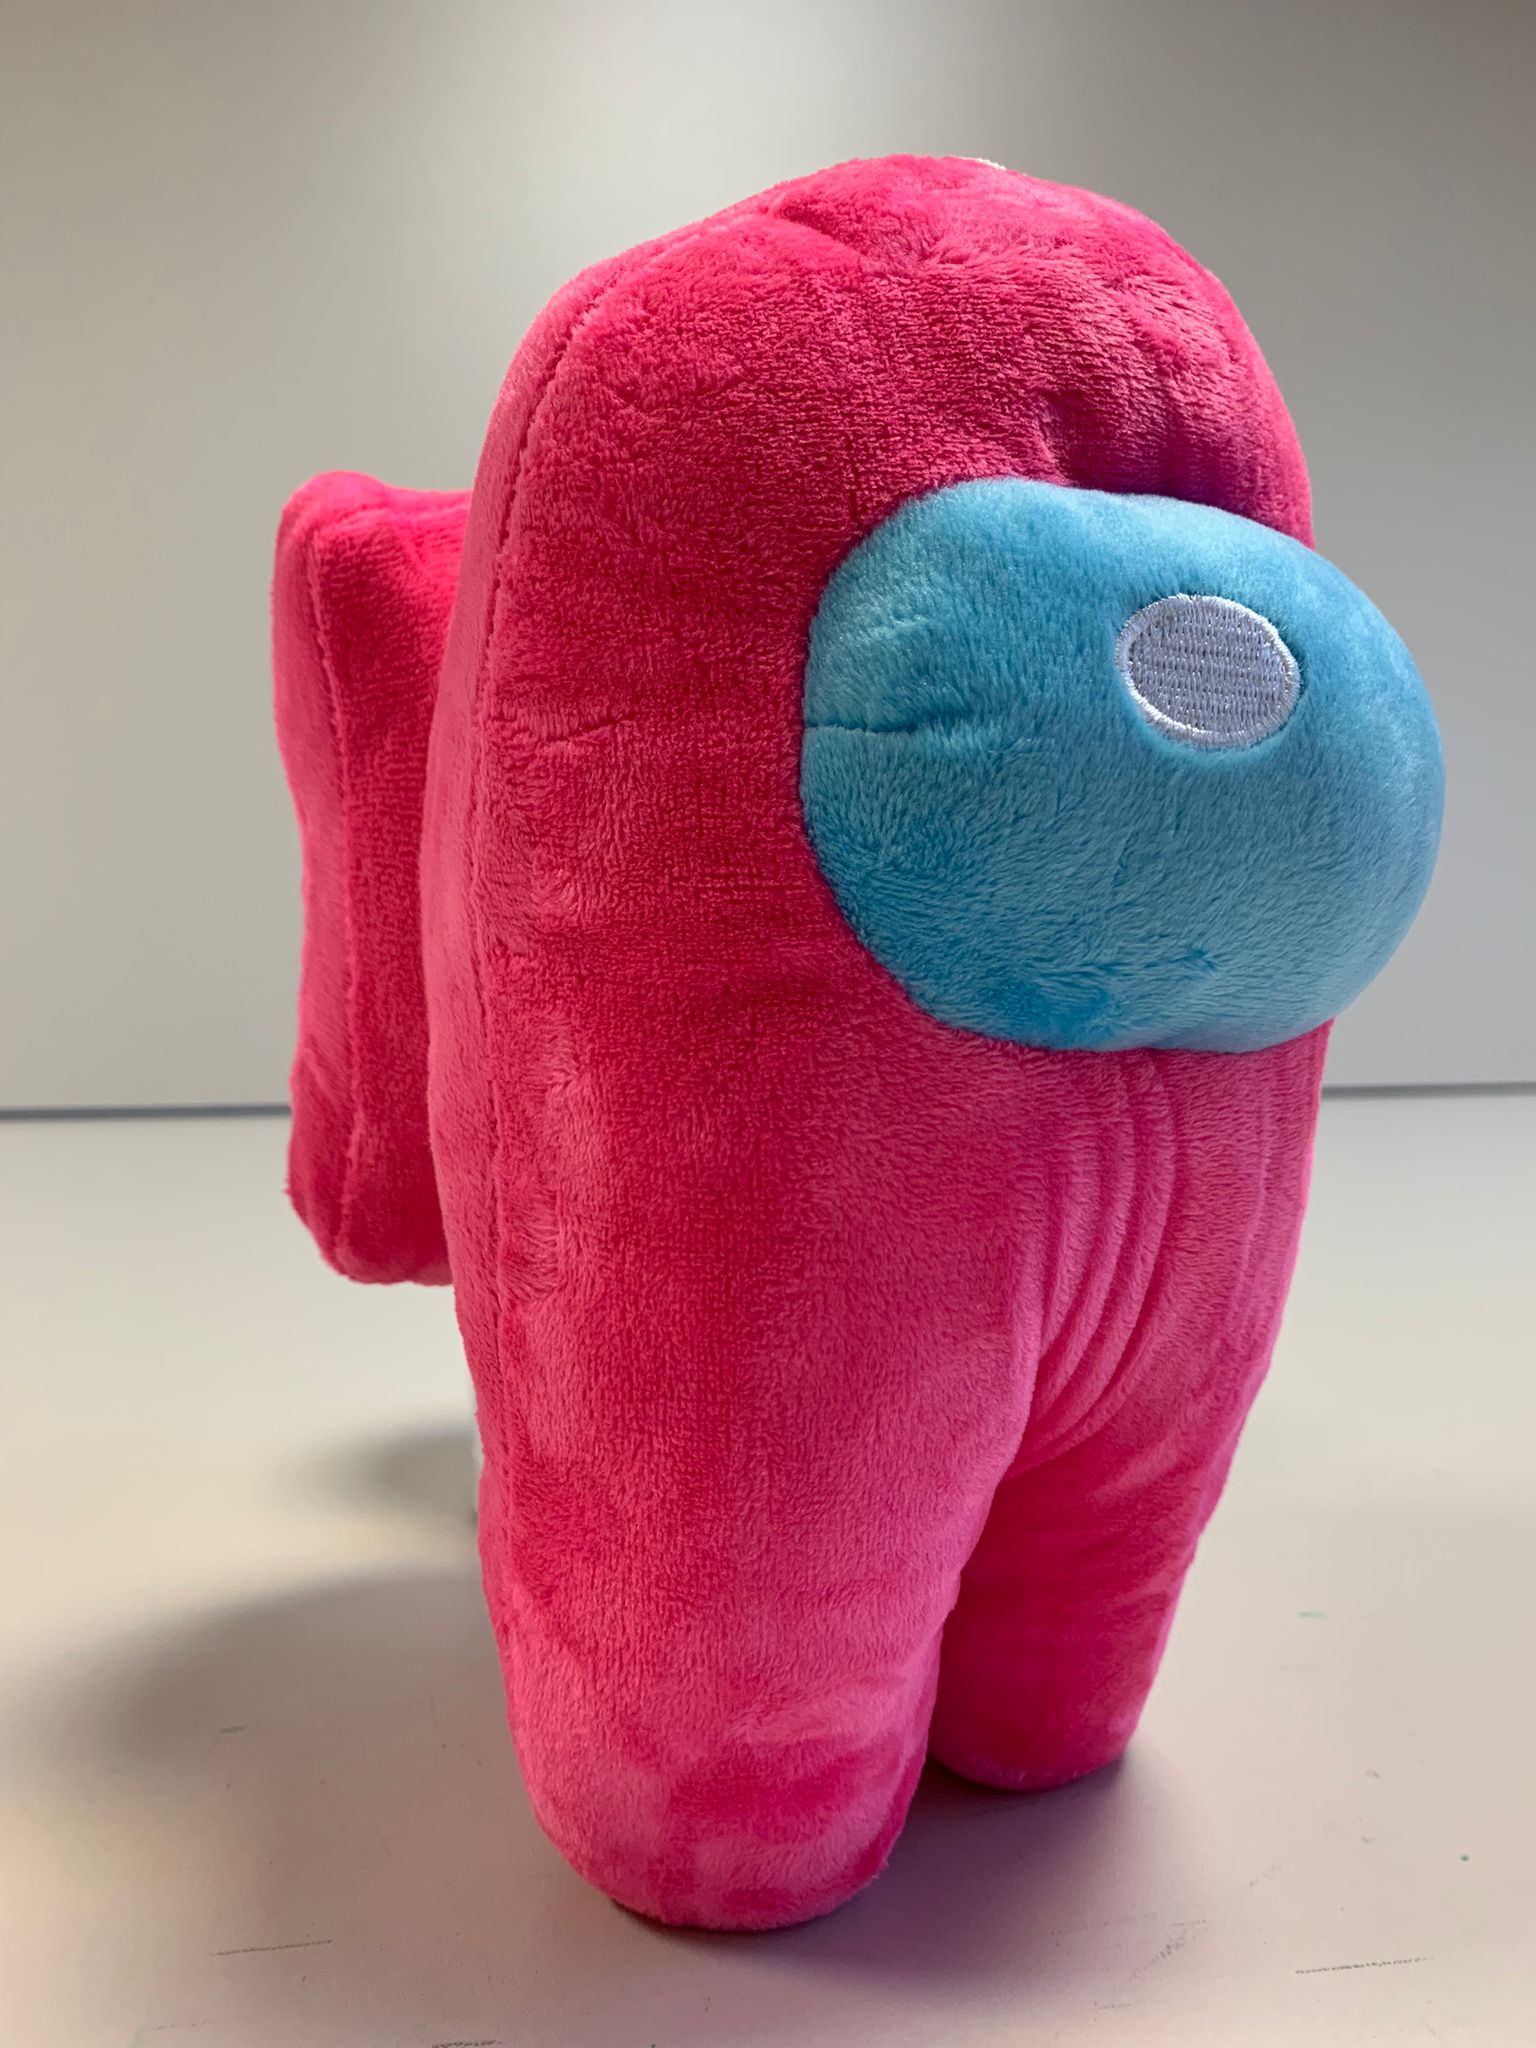 Plush character from the game Among Us, big, pink